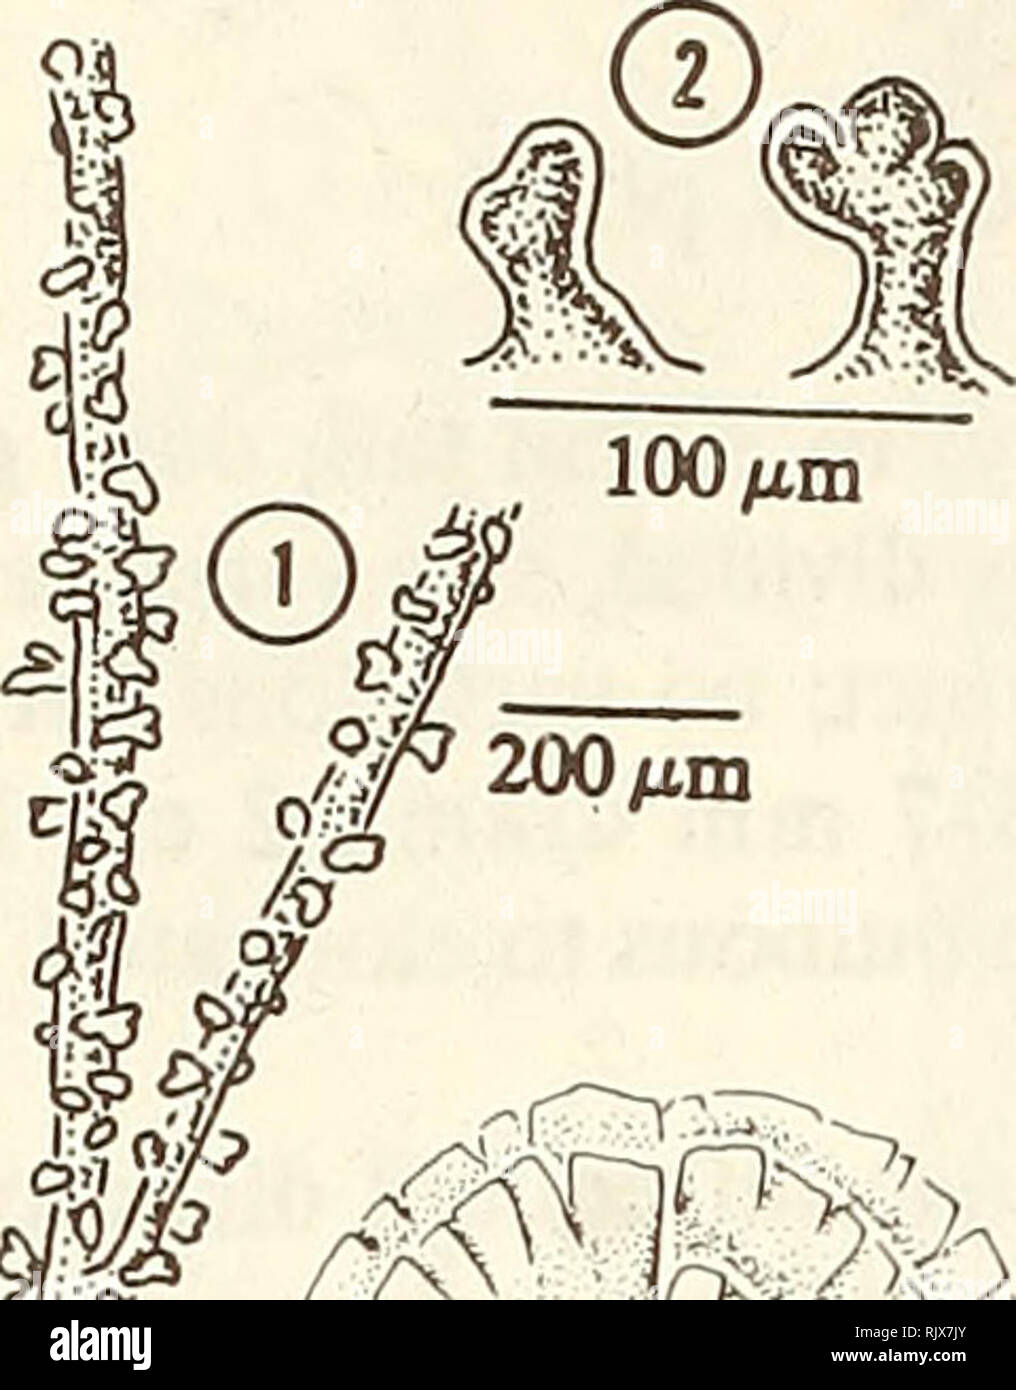 . Atoll research bulletin. Coral reefs and islands; Marine biology; Marine sciences. 18. ft §2 © 4 las 1. Blade siphons. 2. Lateral appendages of blade. 3. Habit of plant. Udotea wilsonii A. Gepp, E.S. Gepp &amp; Howe in A- Gepp &amp; E.S. Gepp 1911: 130-131,144, pi. VII, fig. 66; pi. VIII, figs. 67,67a, 68,68a. [as U. wilsoni] Thallus of multiple fan shaped blades radiating from central axis (rarely as single flat blade), lightly calcified; to 13 cm tall; dark gray-green; blade wider (10 cm) than long (8 cm), thin (1-2 mm); cortex incomplete; zonation faint; stipe 1-2 mm diam., l-2(-4) cm lon Stock Photo